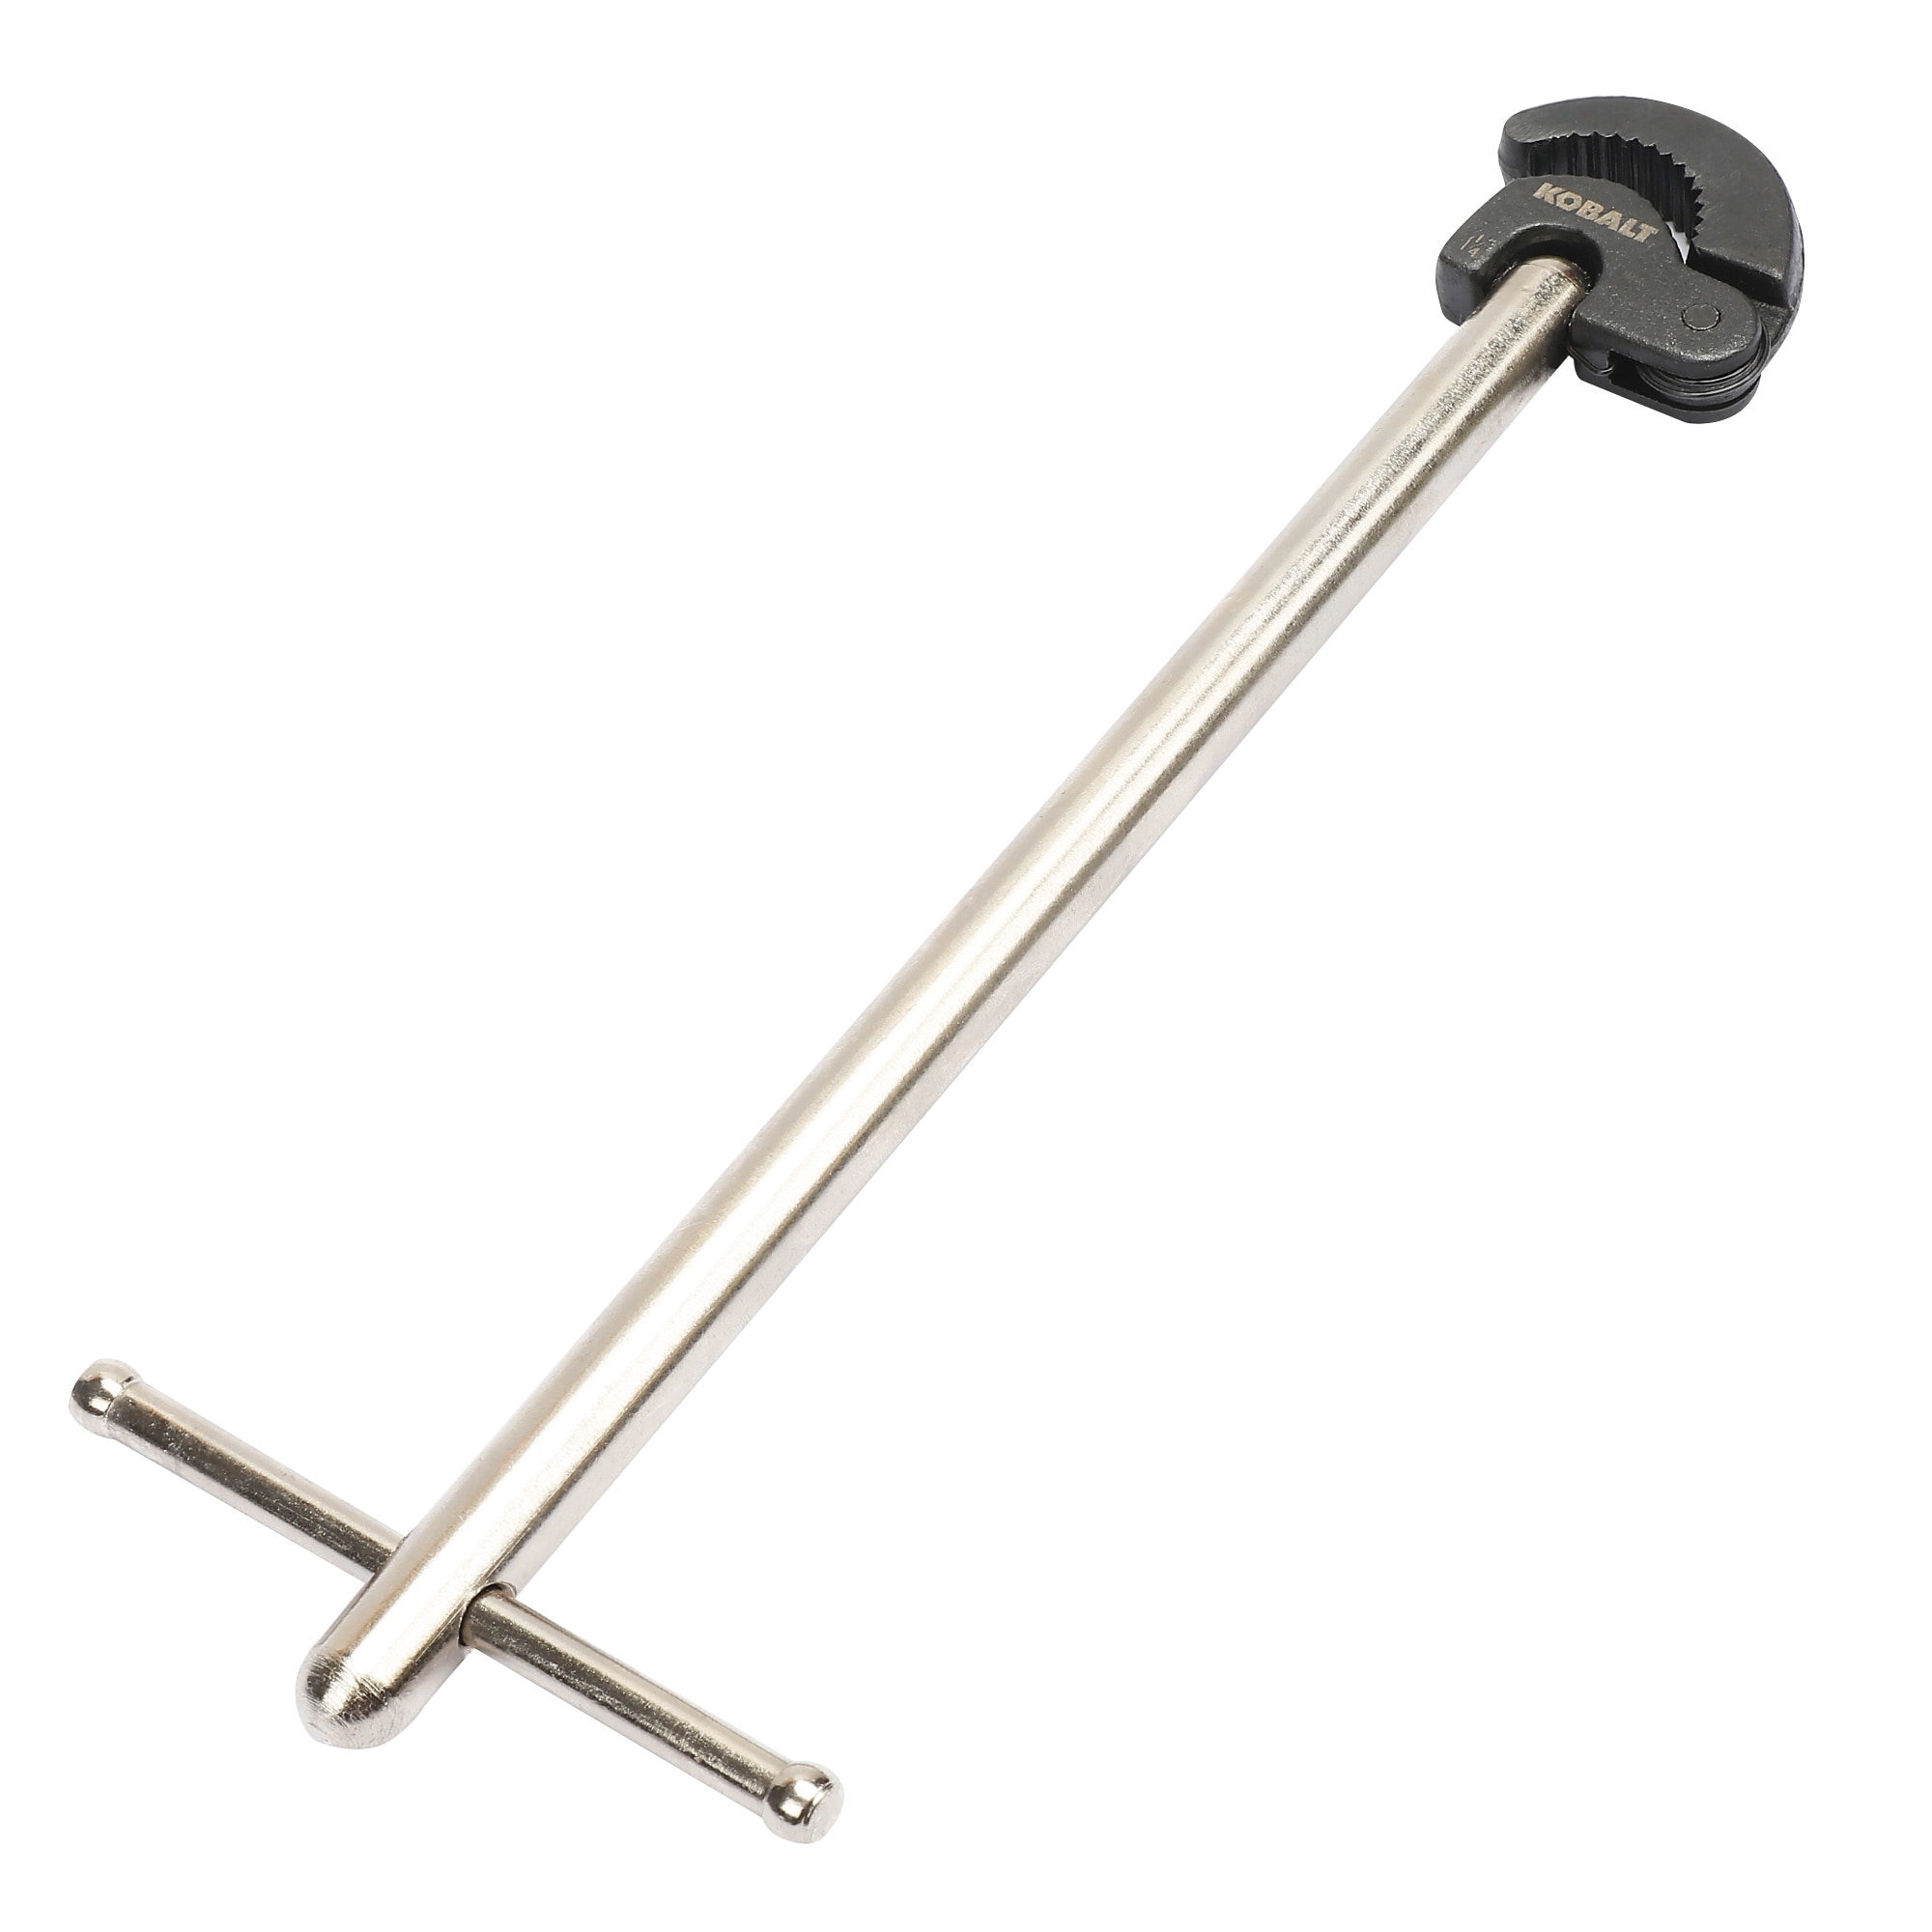 TEKTON Chrome Basin Wrench for Plumbing, Fits 3/8 to 1 inch Nuts